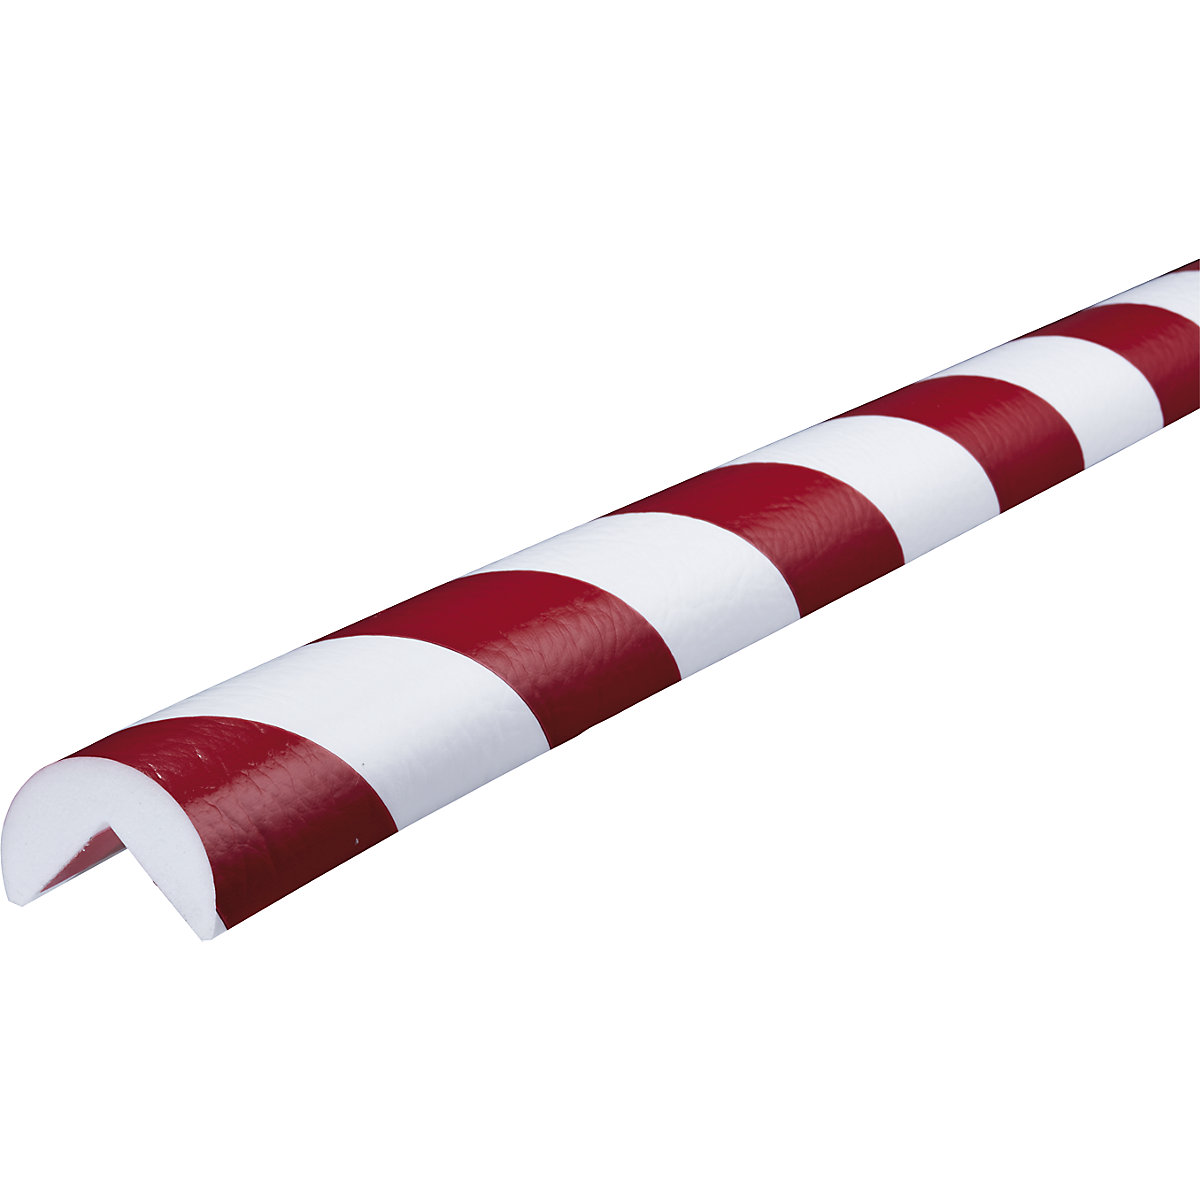 Knuffi® corner protection – SHG, type A, 1 x 5 m roll, red / white-16